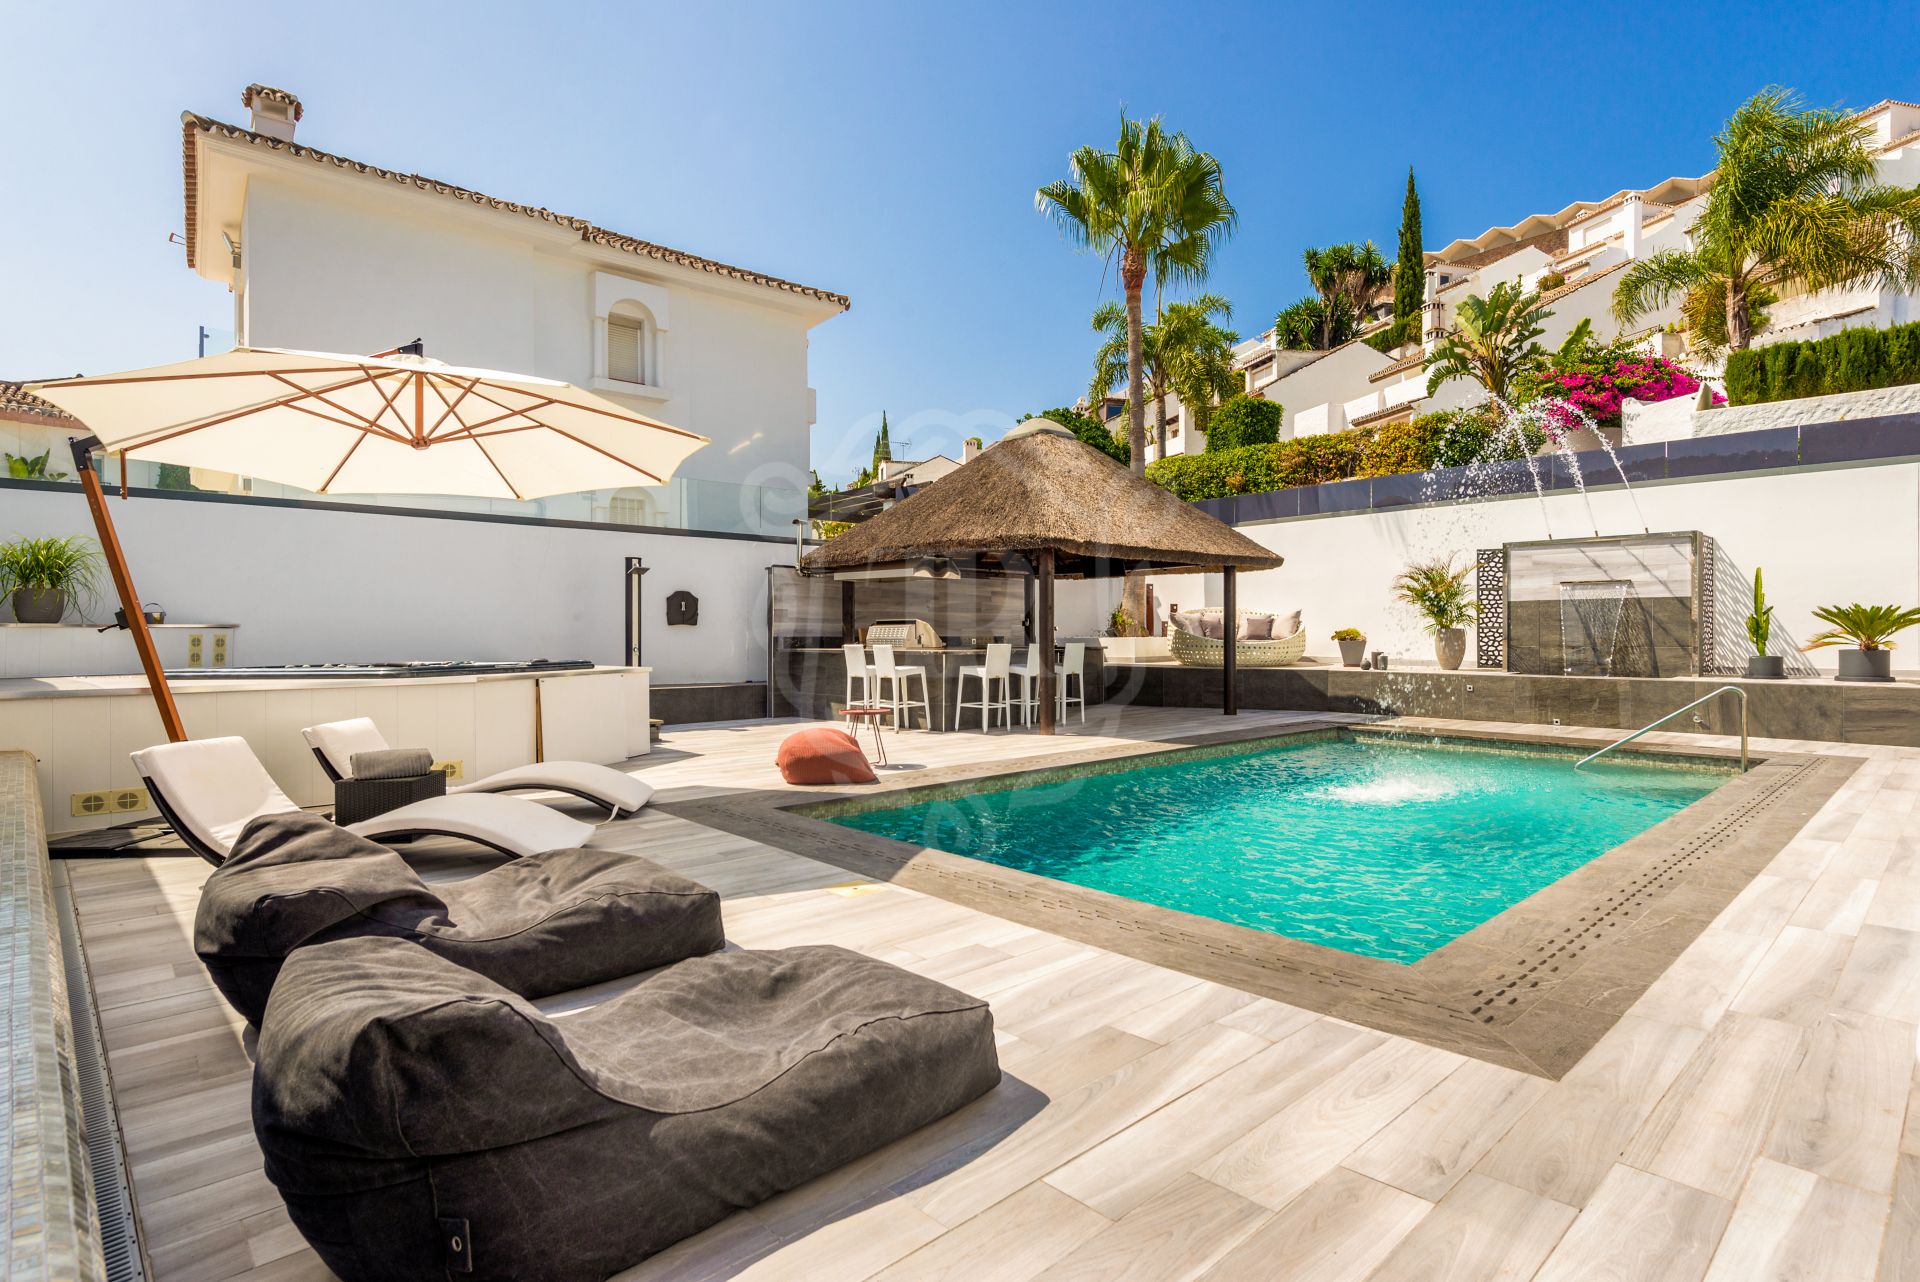 Fantastic villa in Puerto Banus within walking distance to the beach